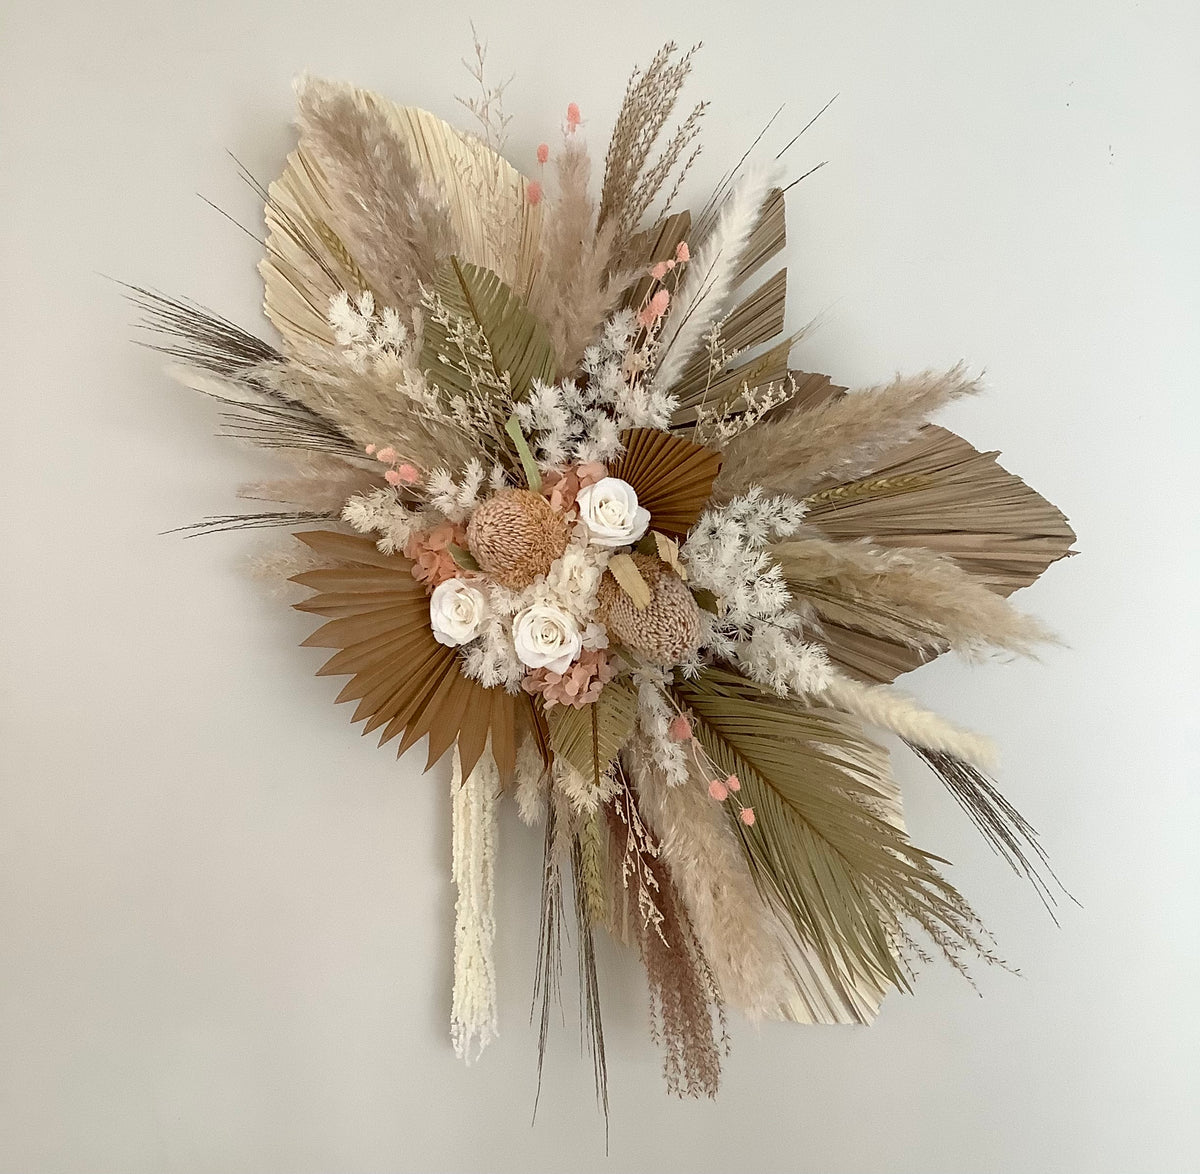 Dried and preserved wall hanging arrangement using a variety of palm leaves and flowers